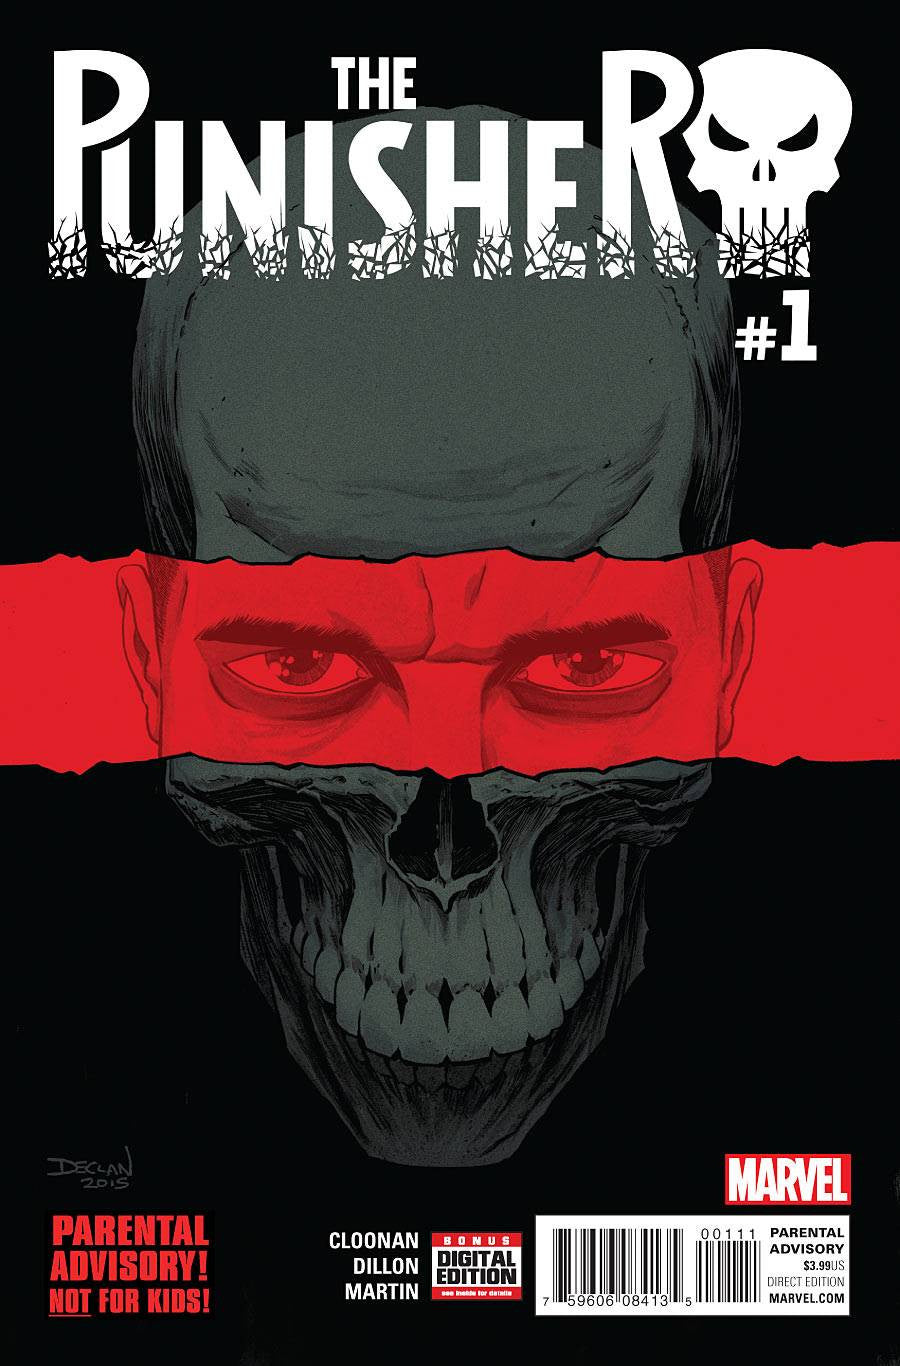 PUNISHER #1 COVER